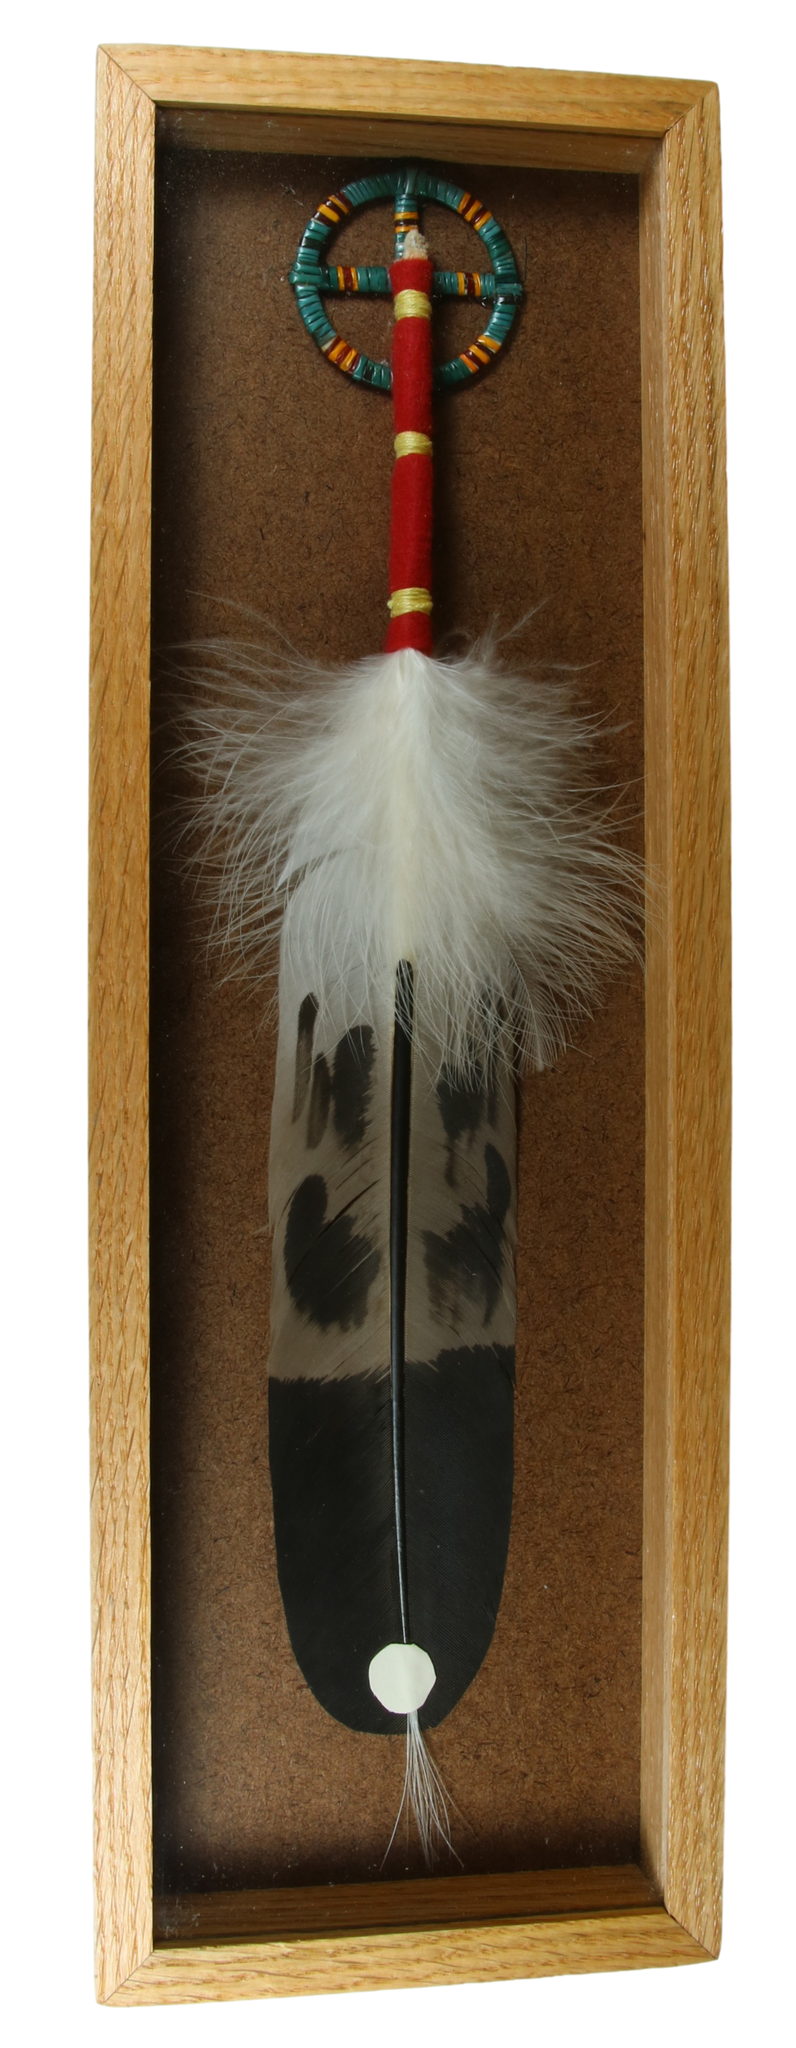 Imitation Hand Painted Eagle Feather W/Quilled Wheel